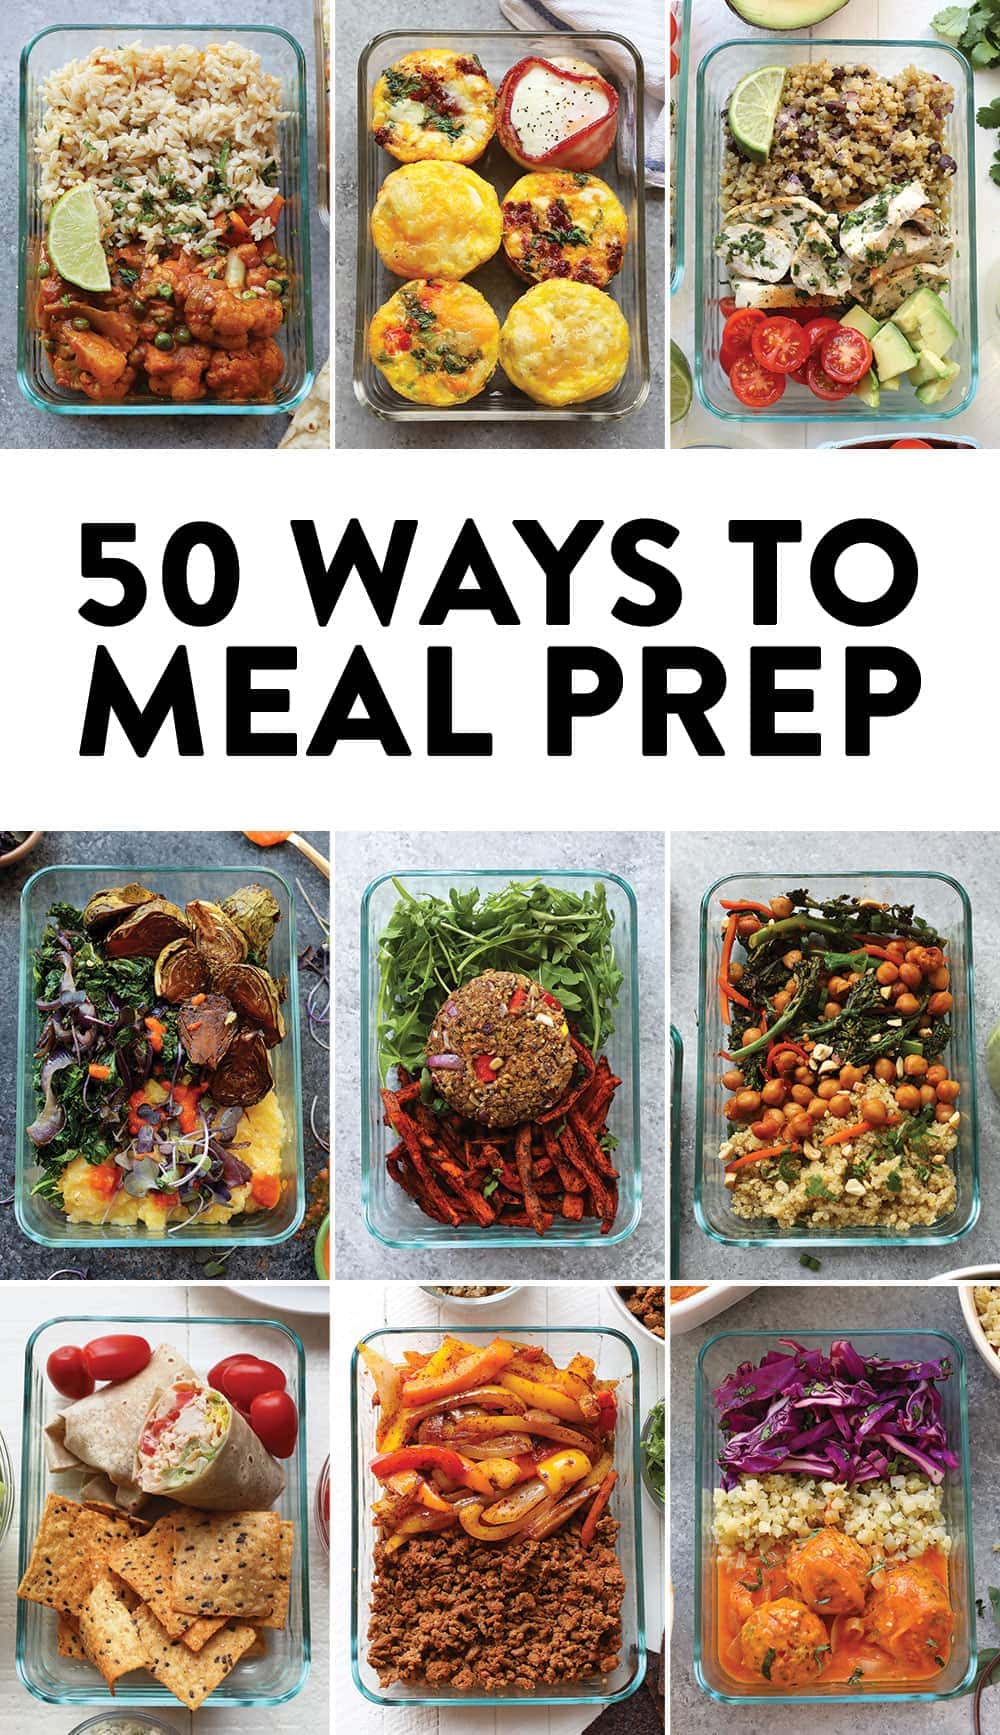 It's HERE! Our annual BEST MEAL PREP RECIPES TO MAKE round-up! We've pulled our top Fit Foodie Finds meal-prep recipes so that you can add these wonderful, healthy meals to your lineup in 2018! 